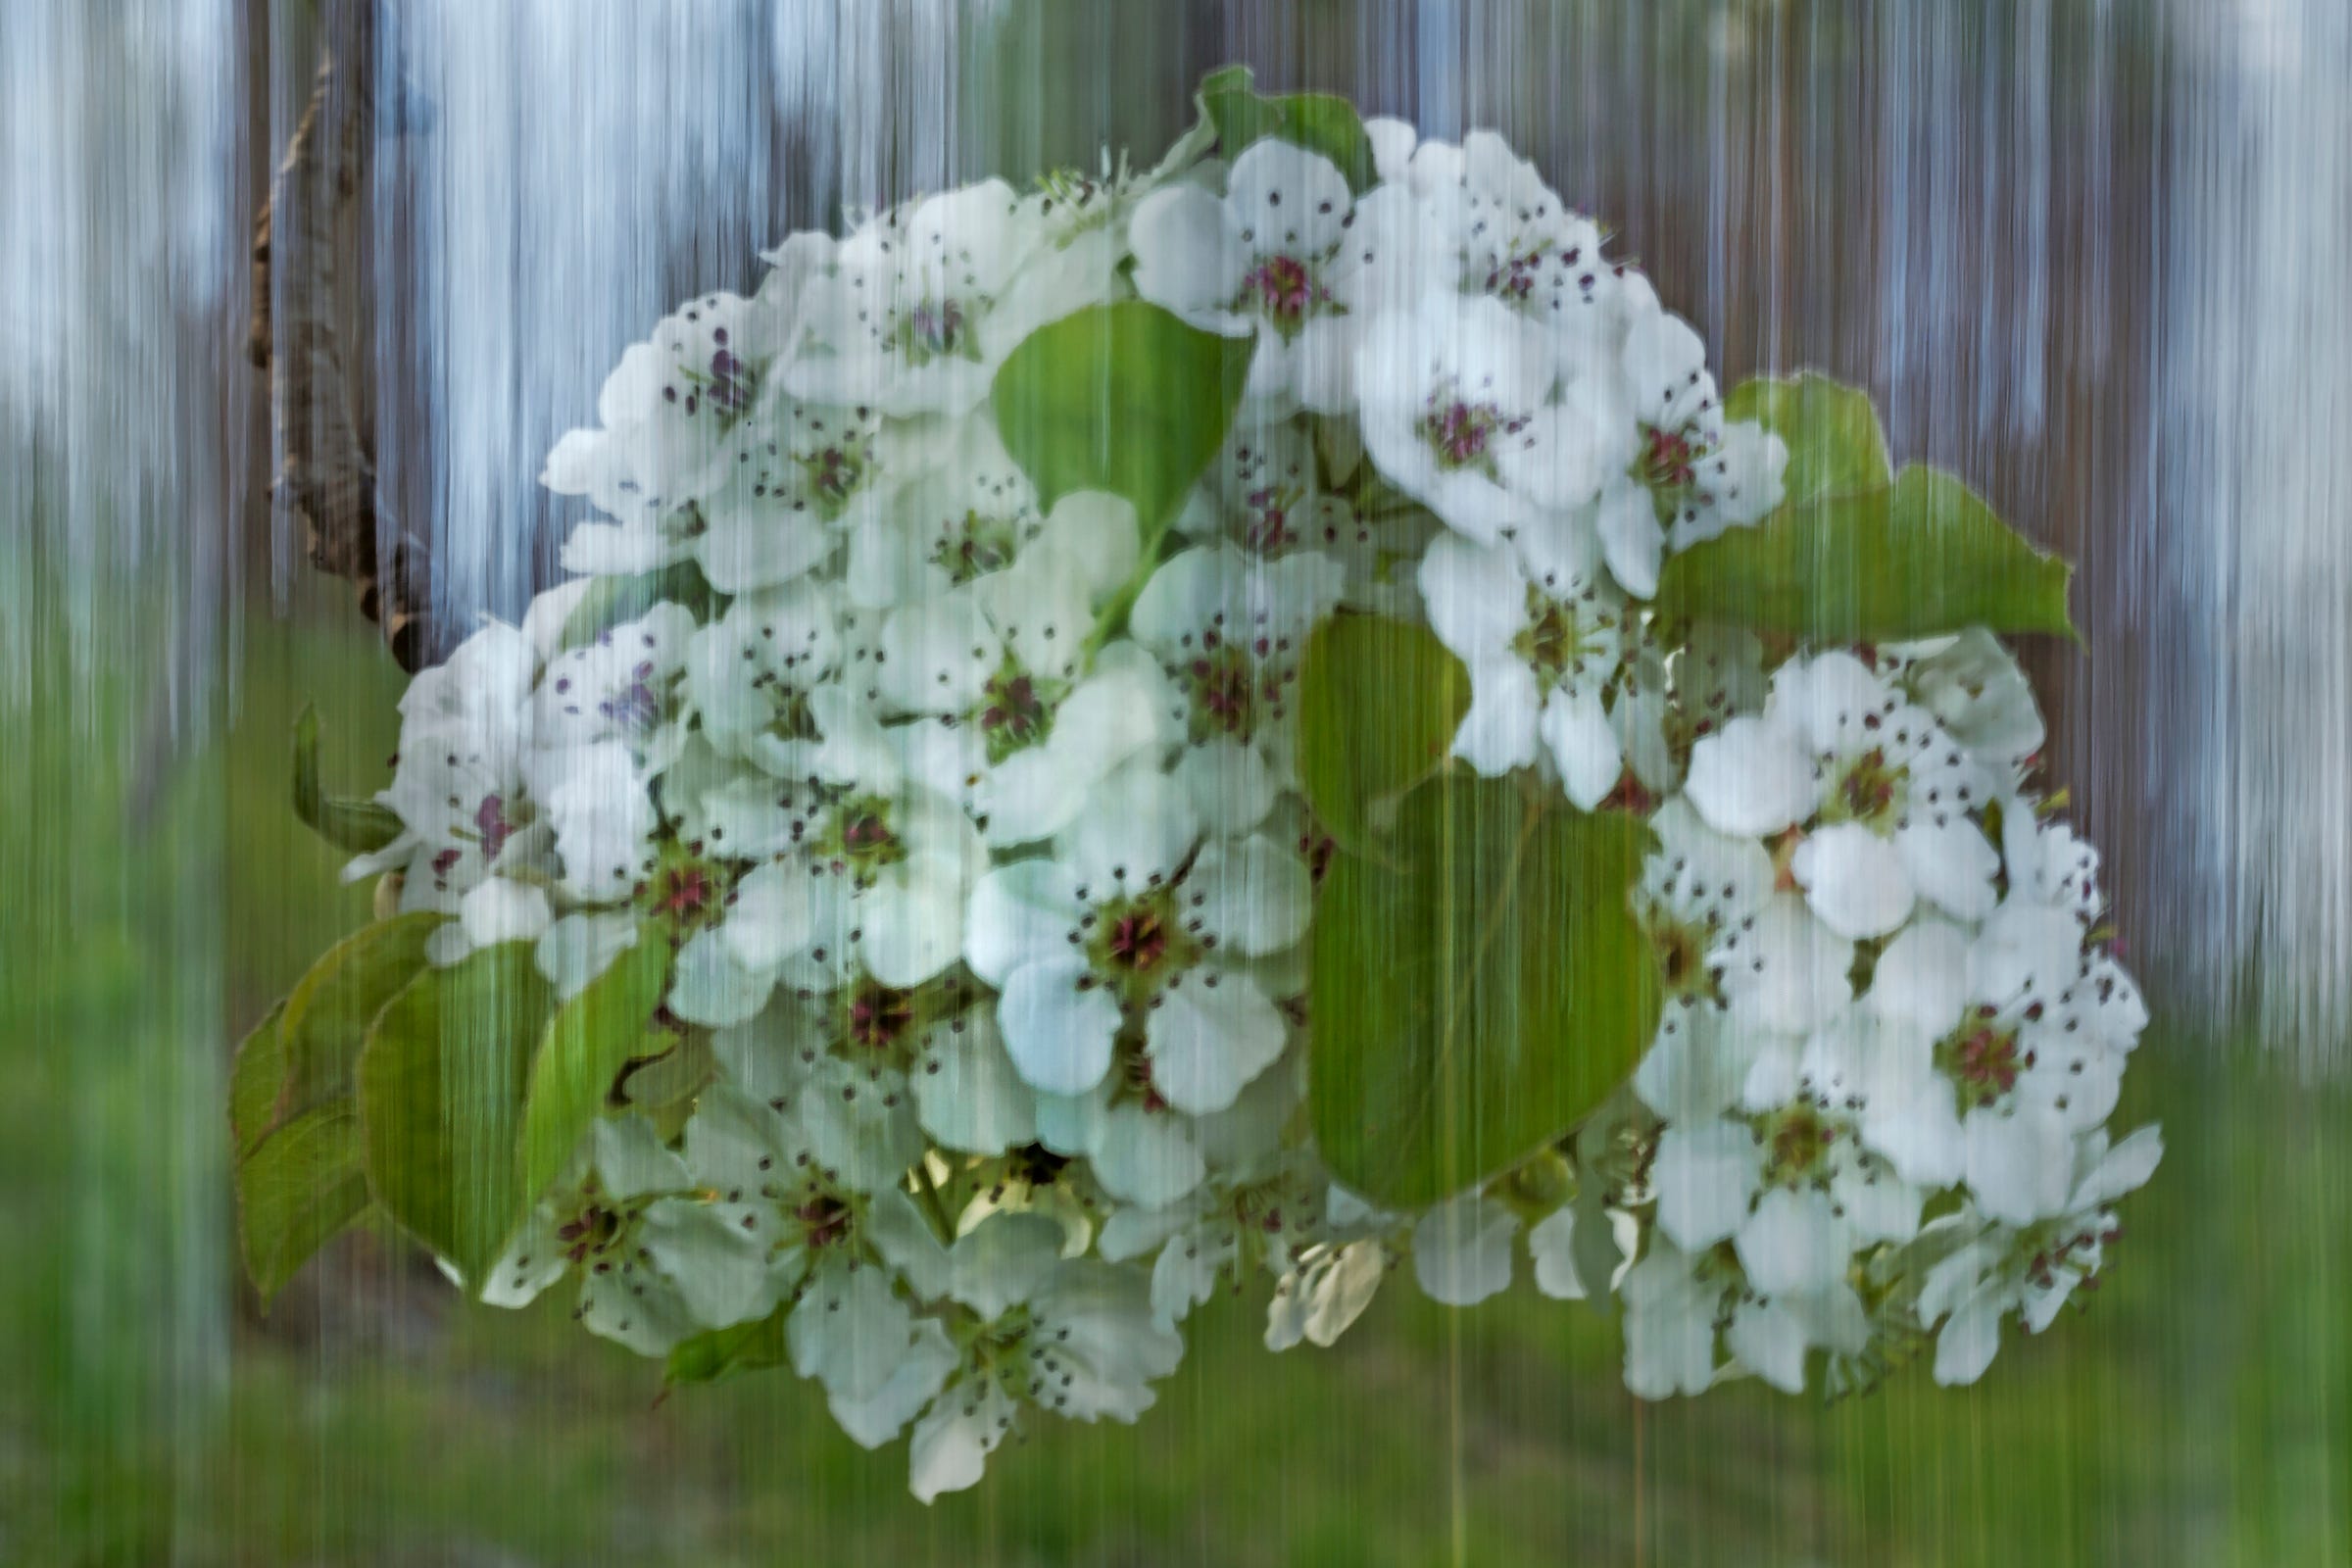 A tree flowering in white stands on Belle Isle in Detroit, Michigan on Monday, May 4, 2020. This single photograph was made with a shutter speed of 30 seconds. The photographer used a leather cover held over the front of the lens, lifting it briefly to expose multiple scenes.